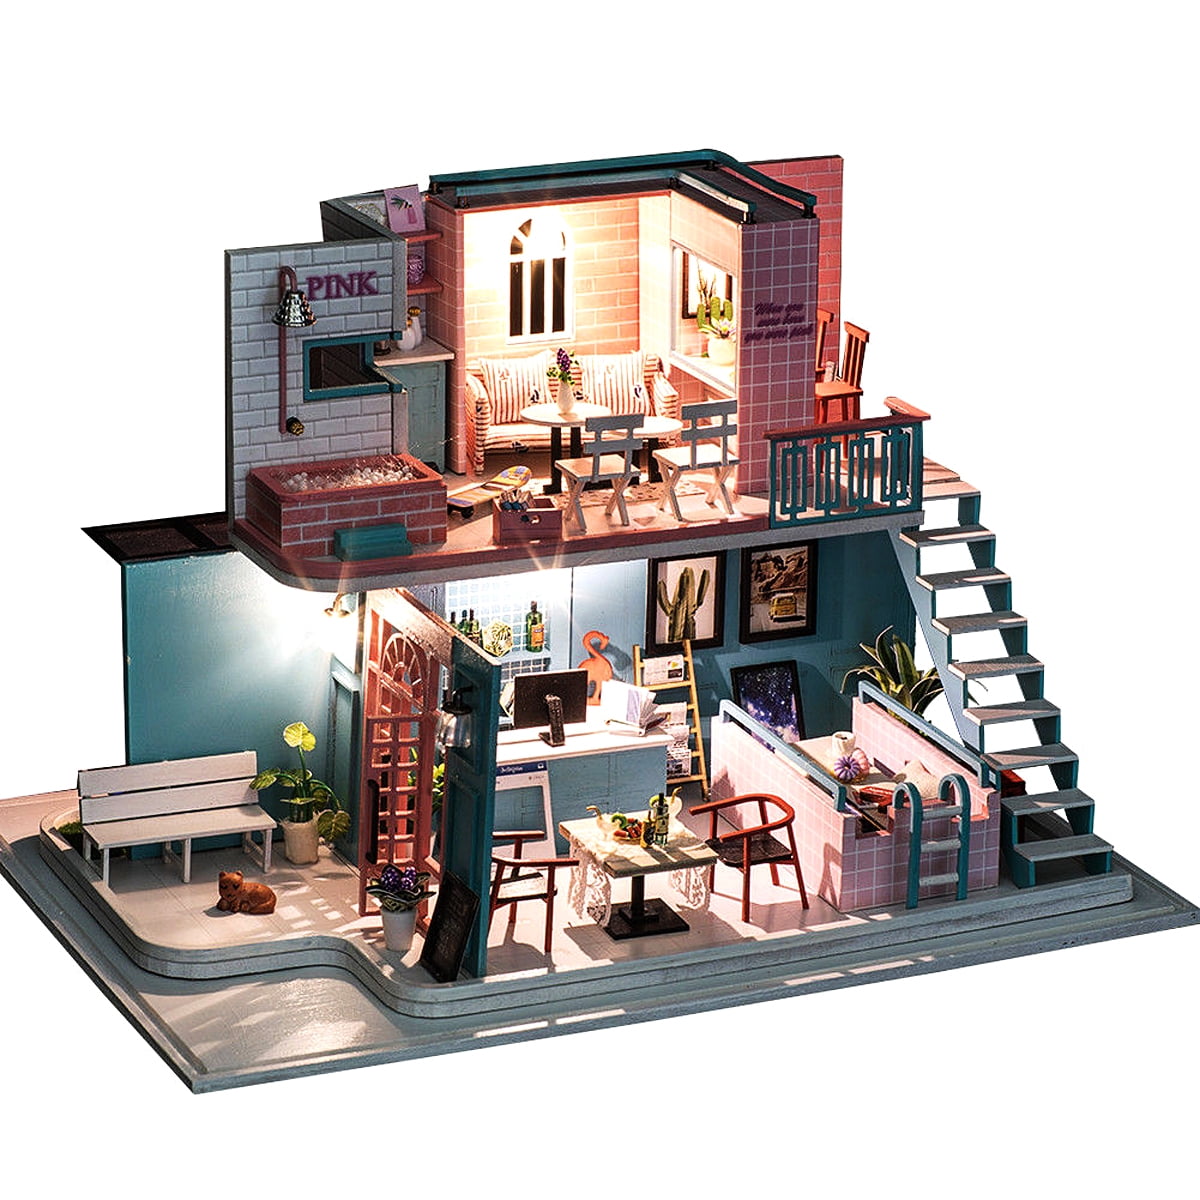 LED Doll House Miniature Furniture DIY 3D Wooden Time Apartment Children Gift